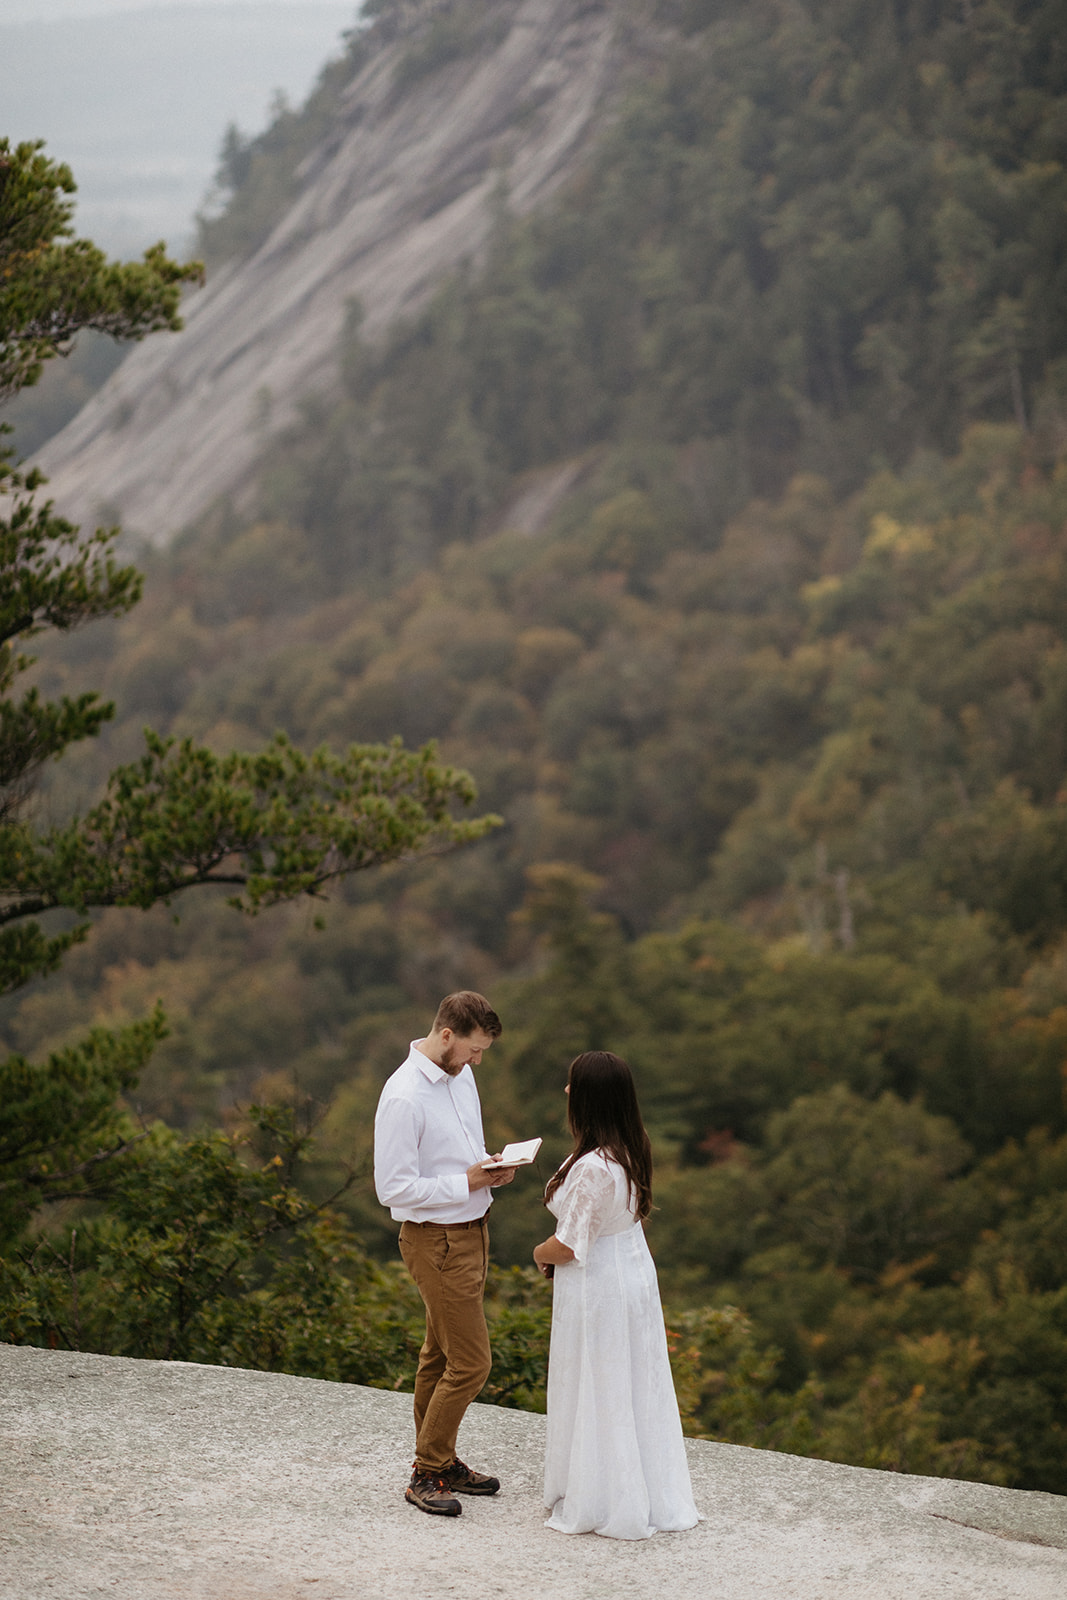 Where to elope in New Hampshire